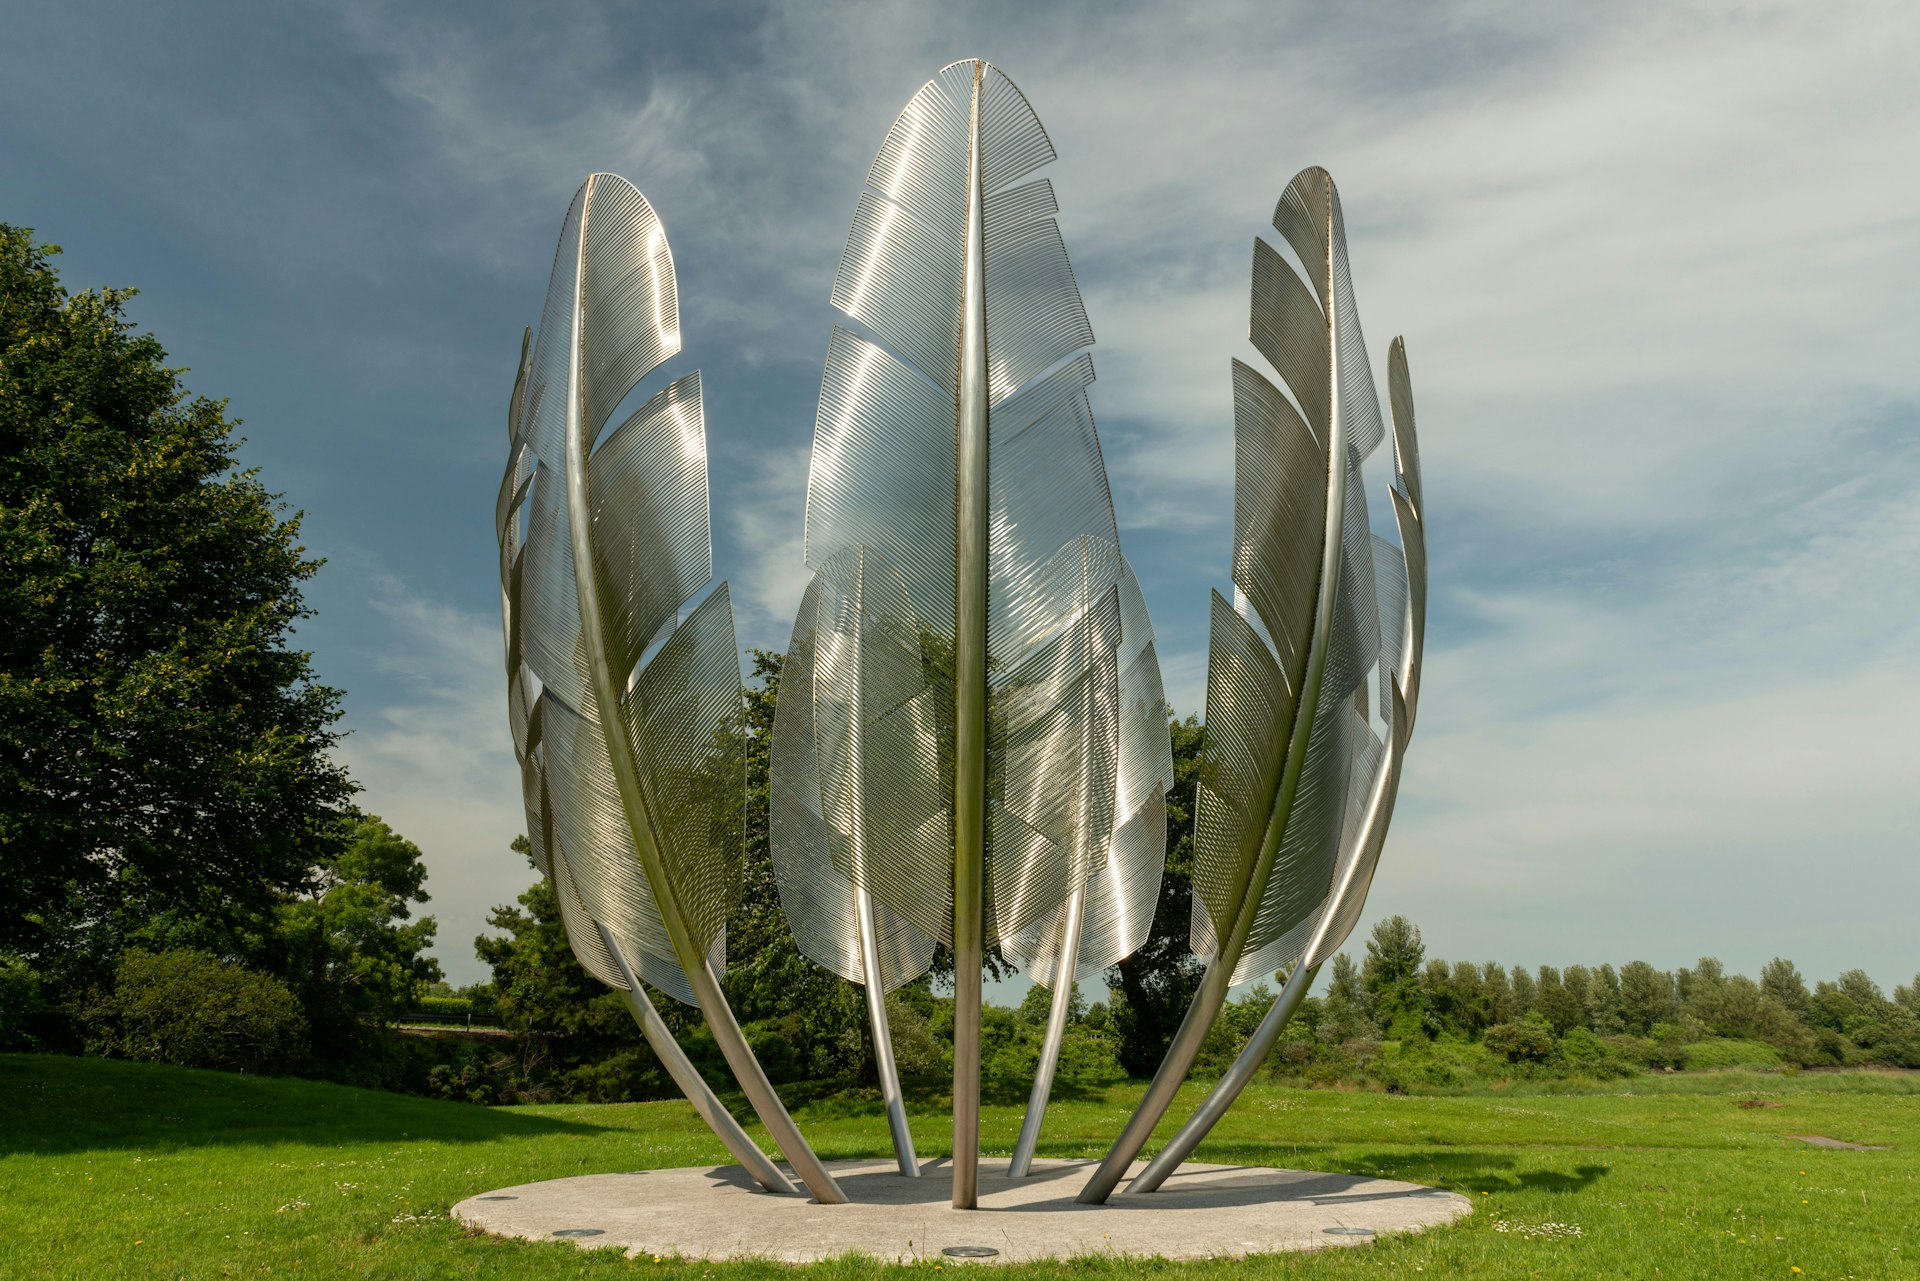 The Kindred Spirits Choctaw Monument art installation by Alex Pentek in Bailick Park Midleton County Cork Ireland